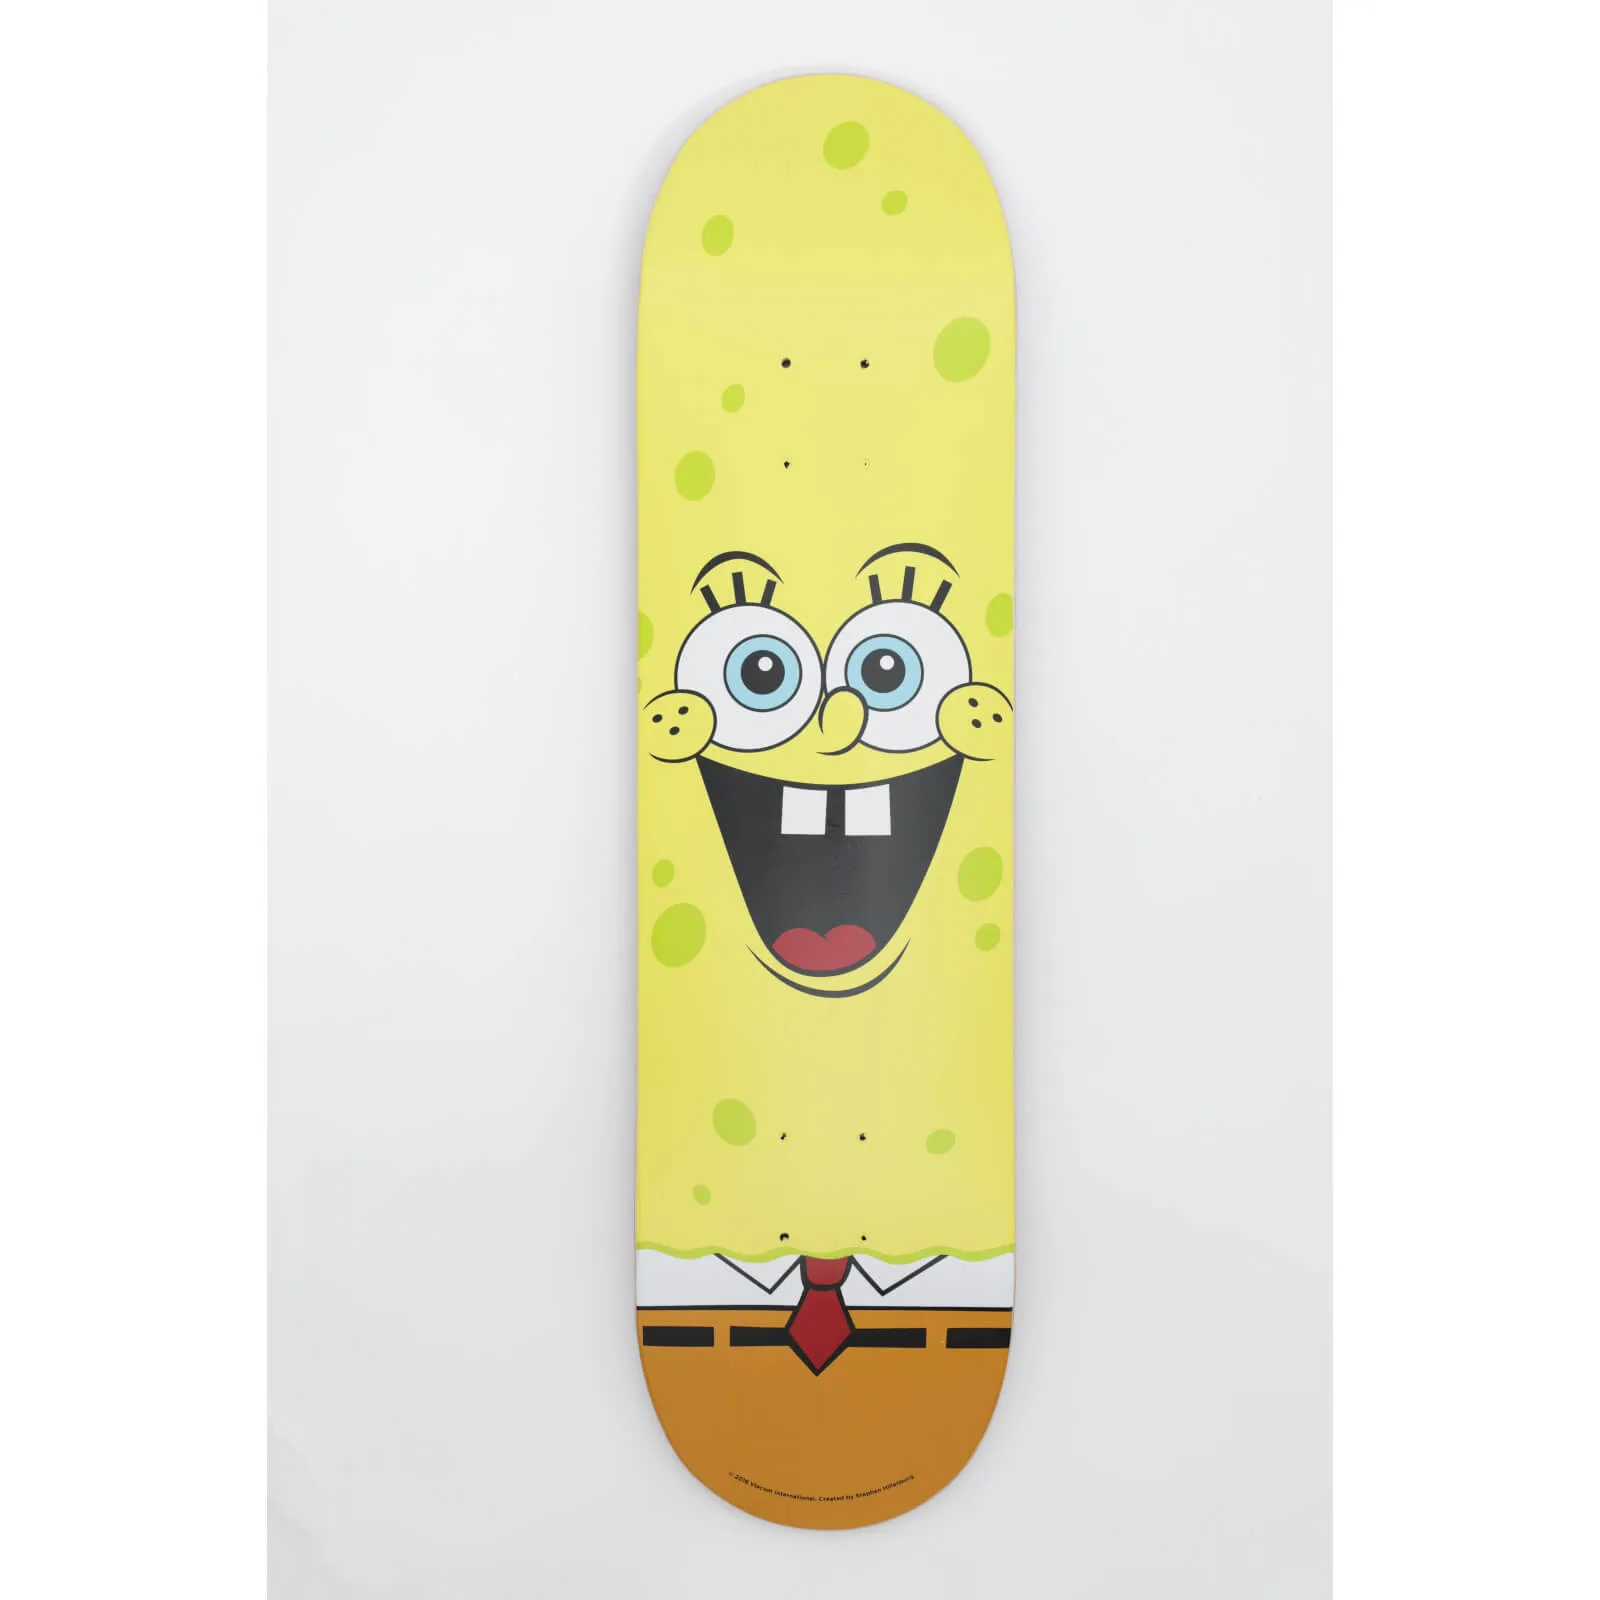 SpongeBob  Exclusive Skateboard Deck - Limited to 500 pieces only